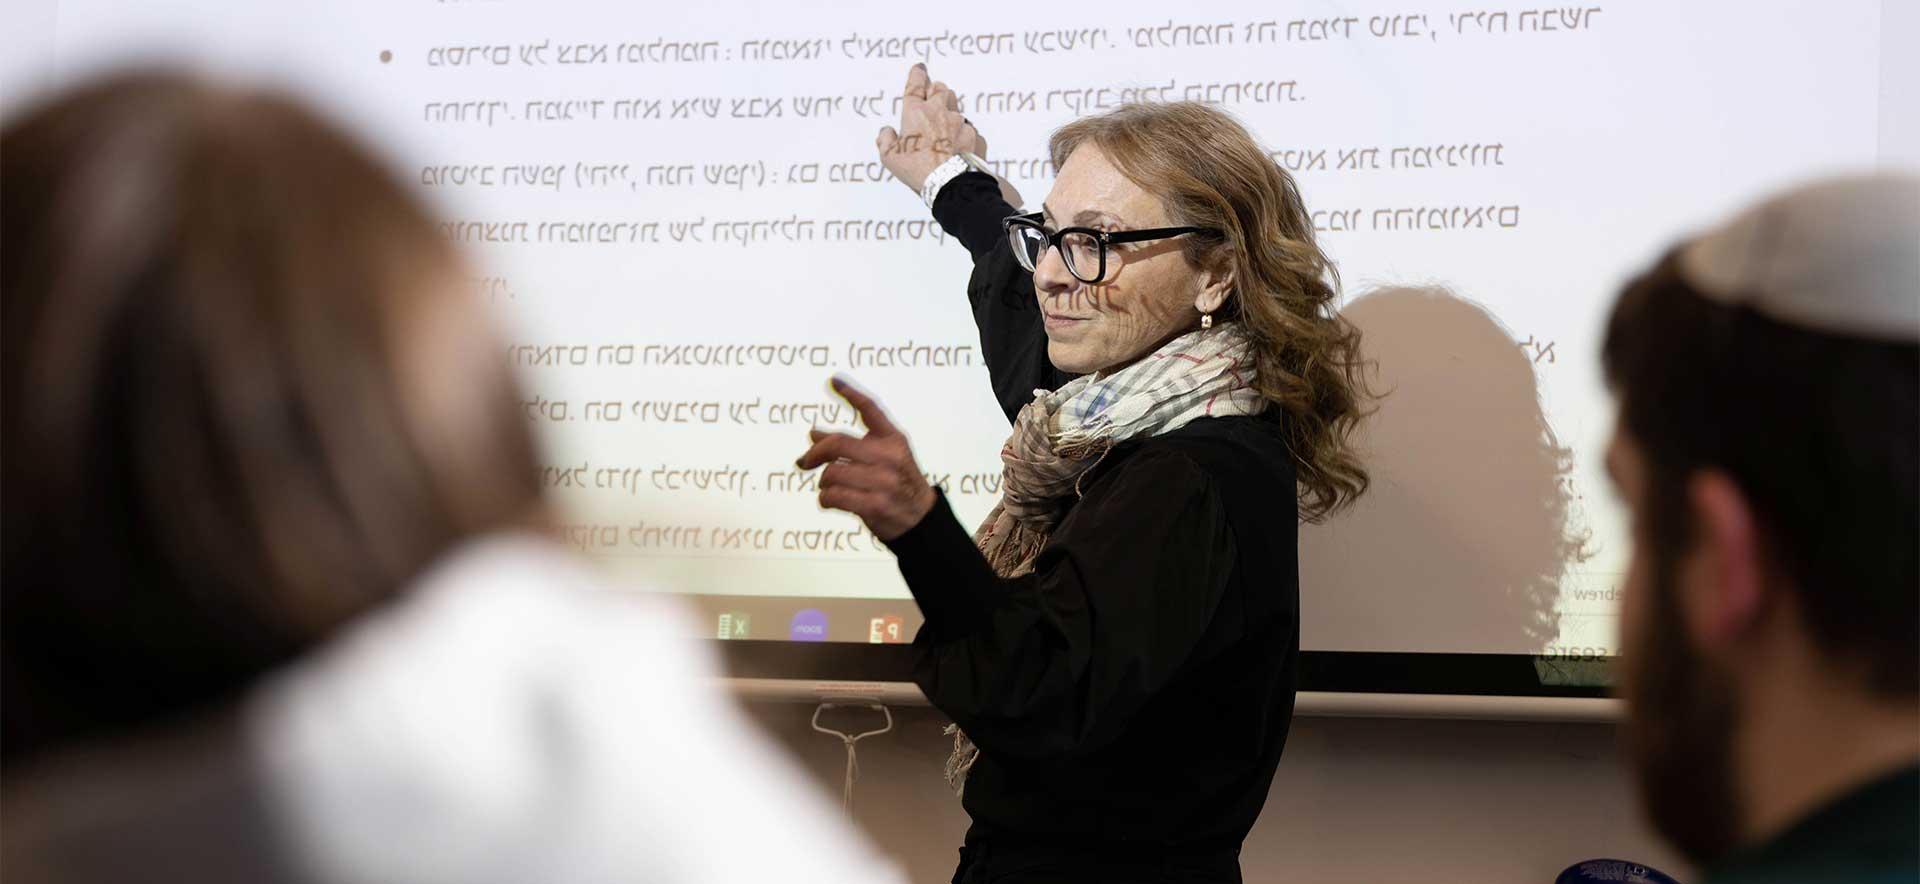 Professor Sara Hascal points to Hebrew projected onto a screen in a classroom